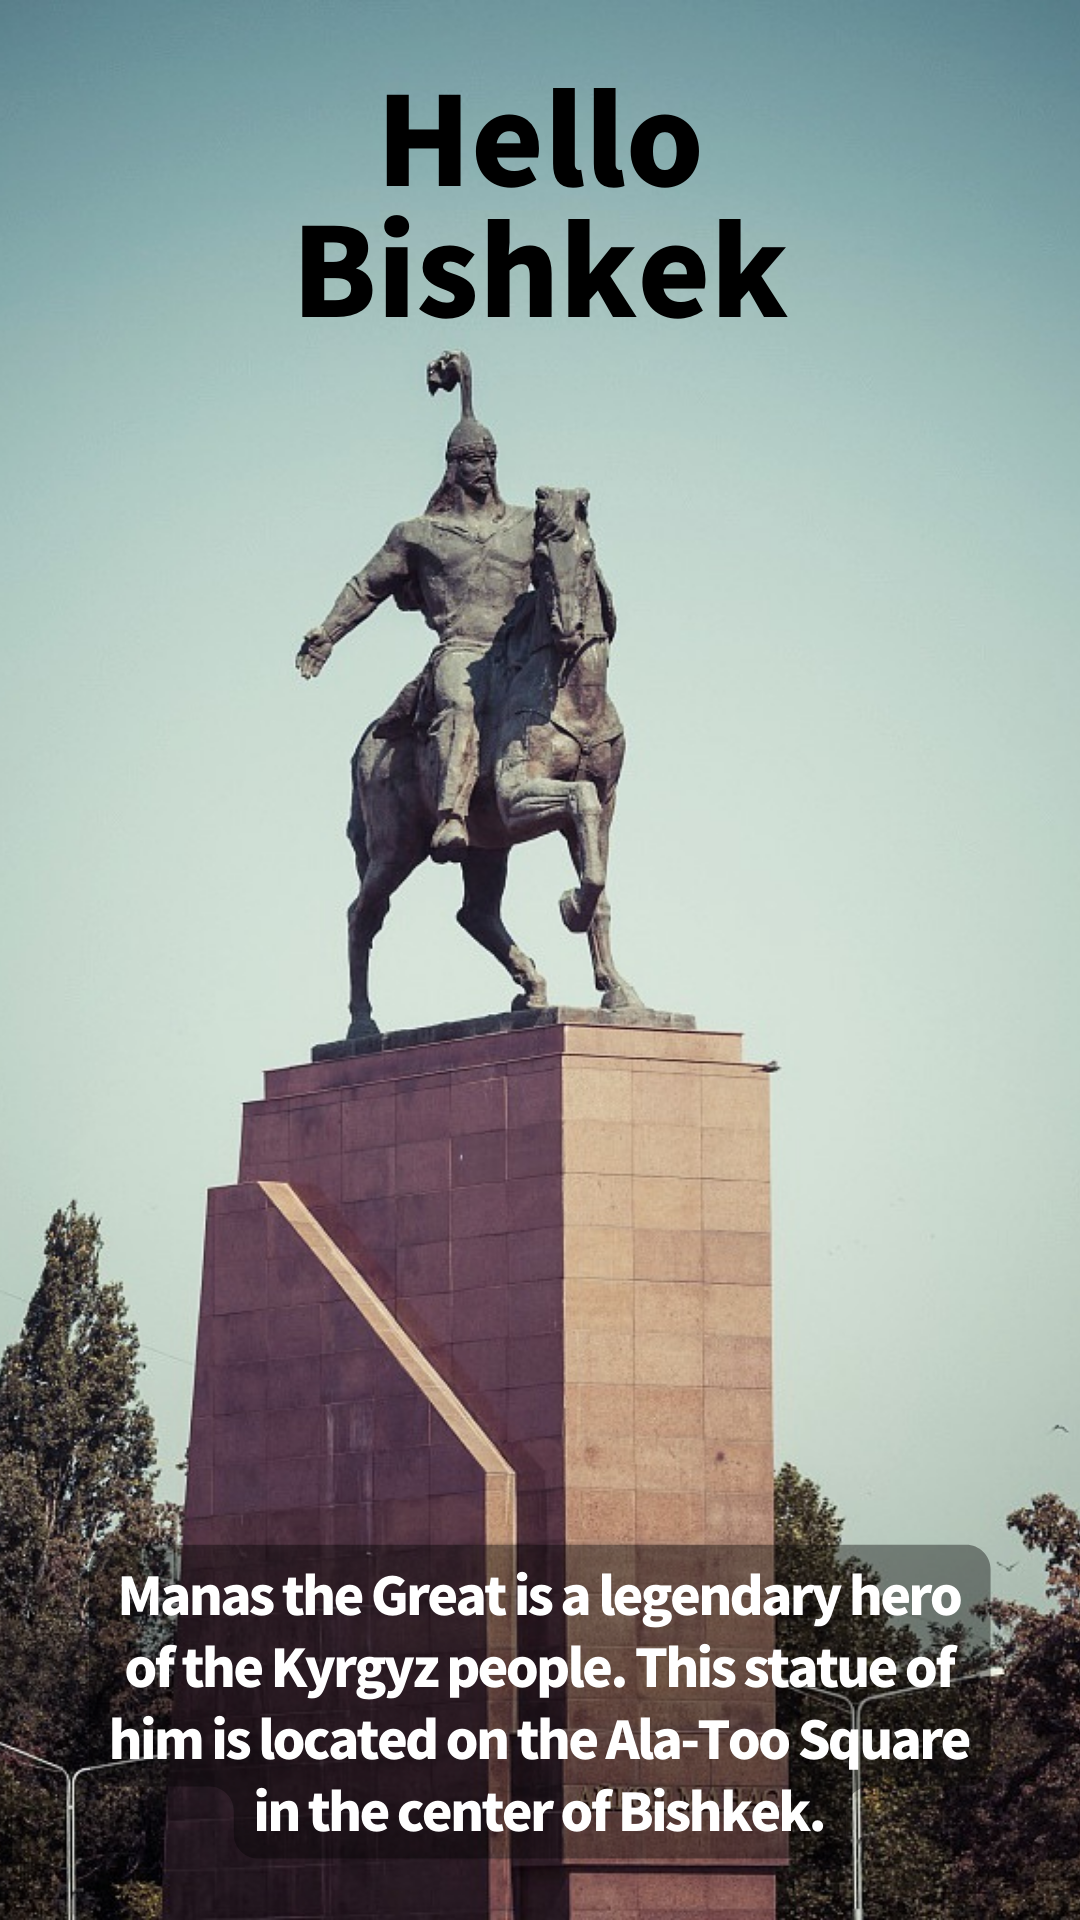 Manas the Great, Kyrgyz national icon